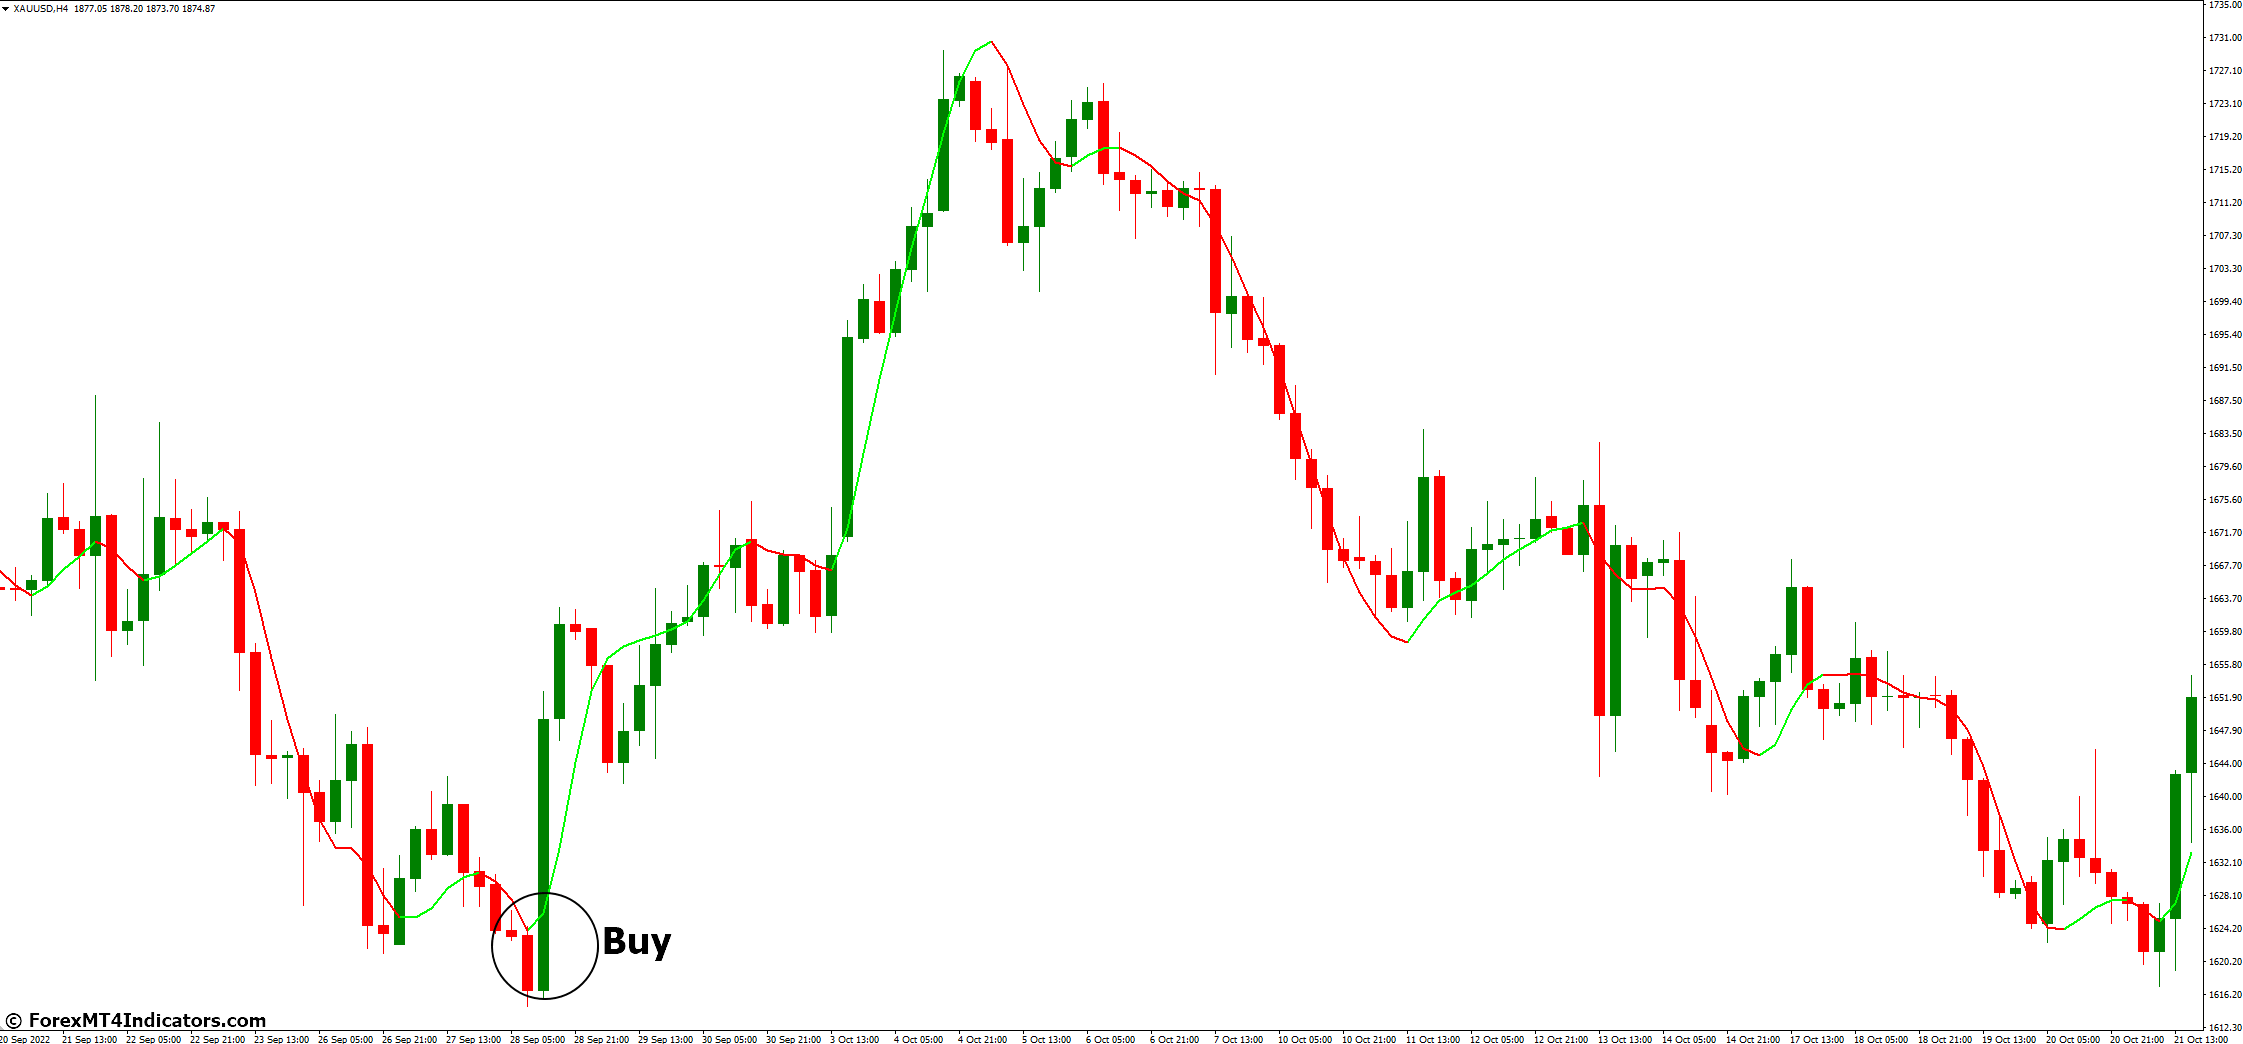 How to Trade with HMA Trend MT4 Indicator - Buy Entry